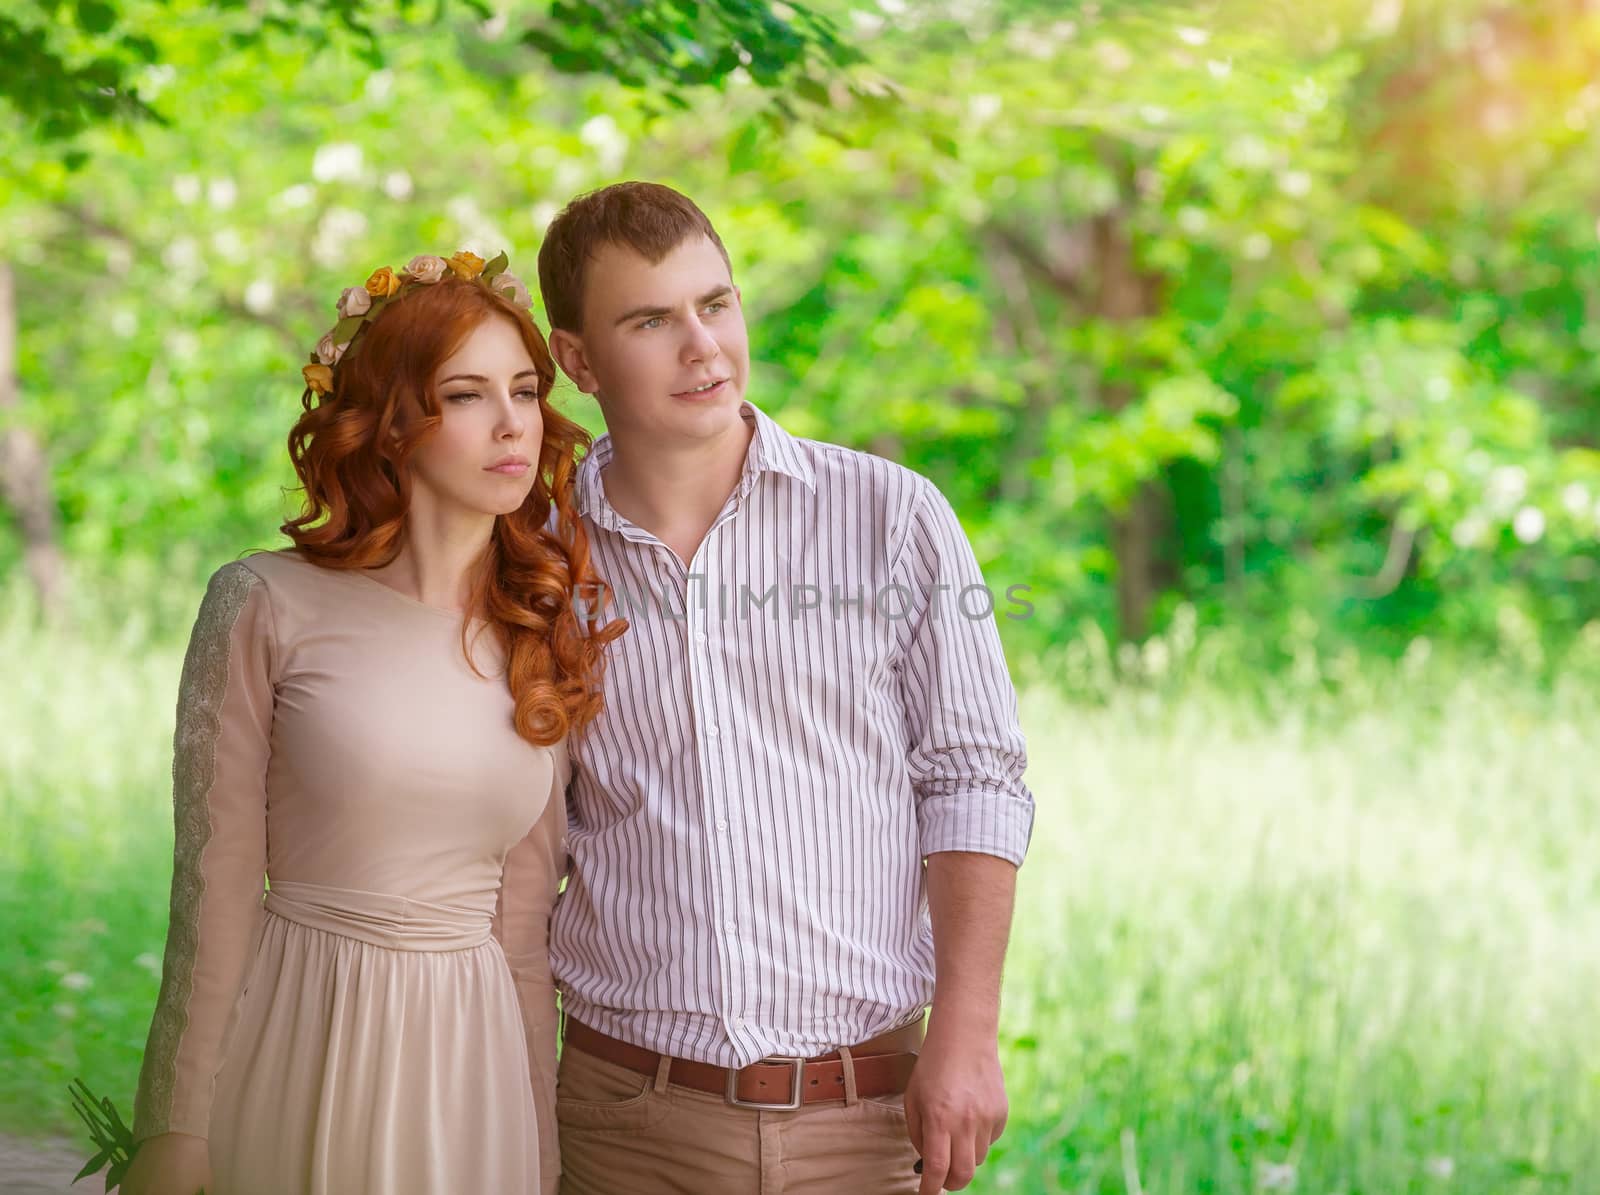 Romantic couple in the park by Anna_Omelchenko